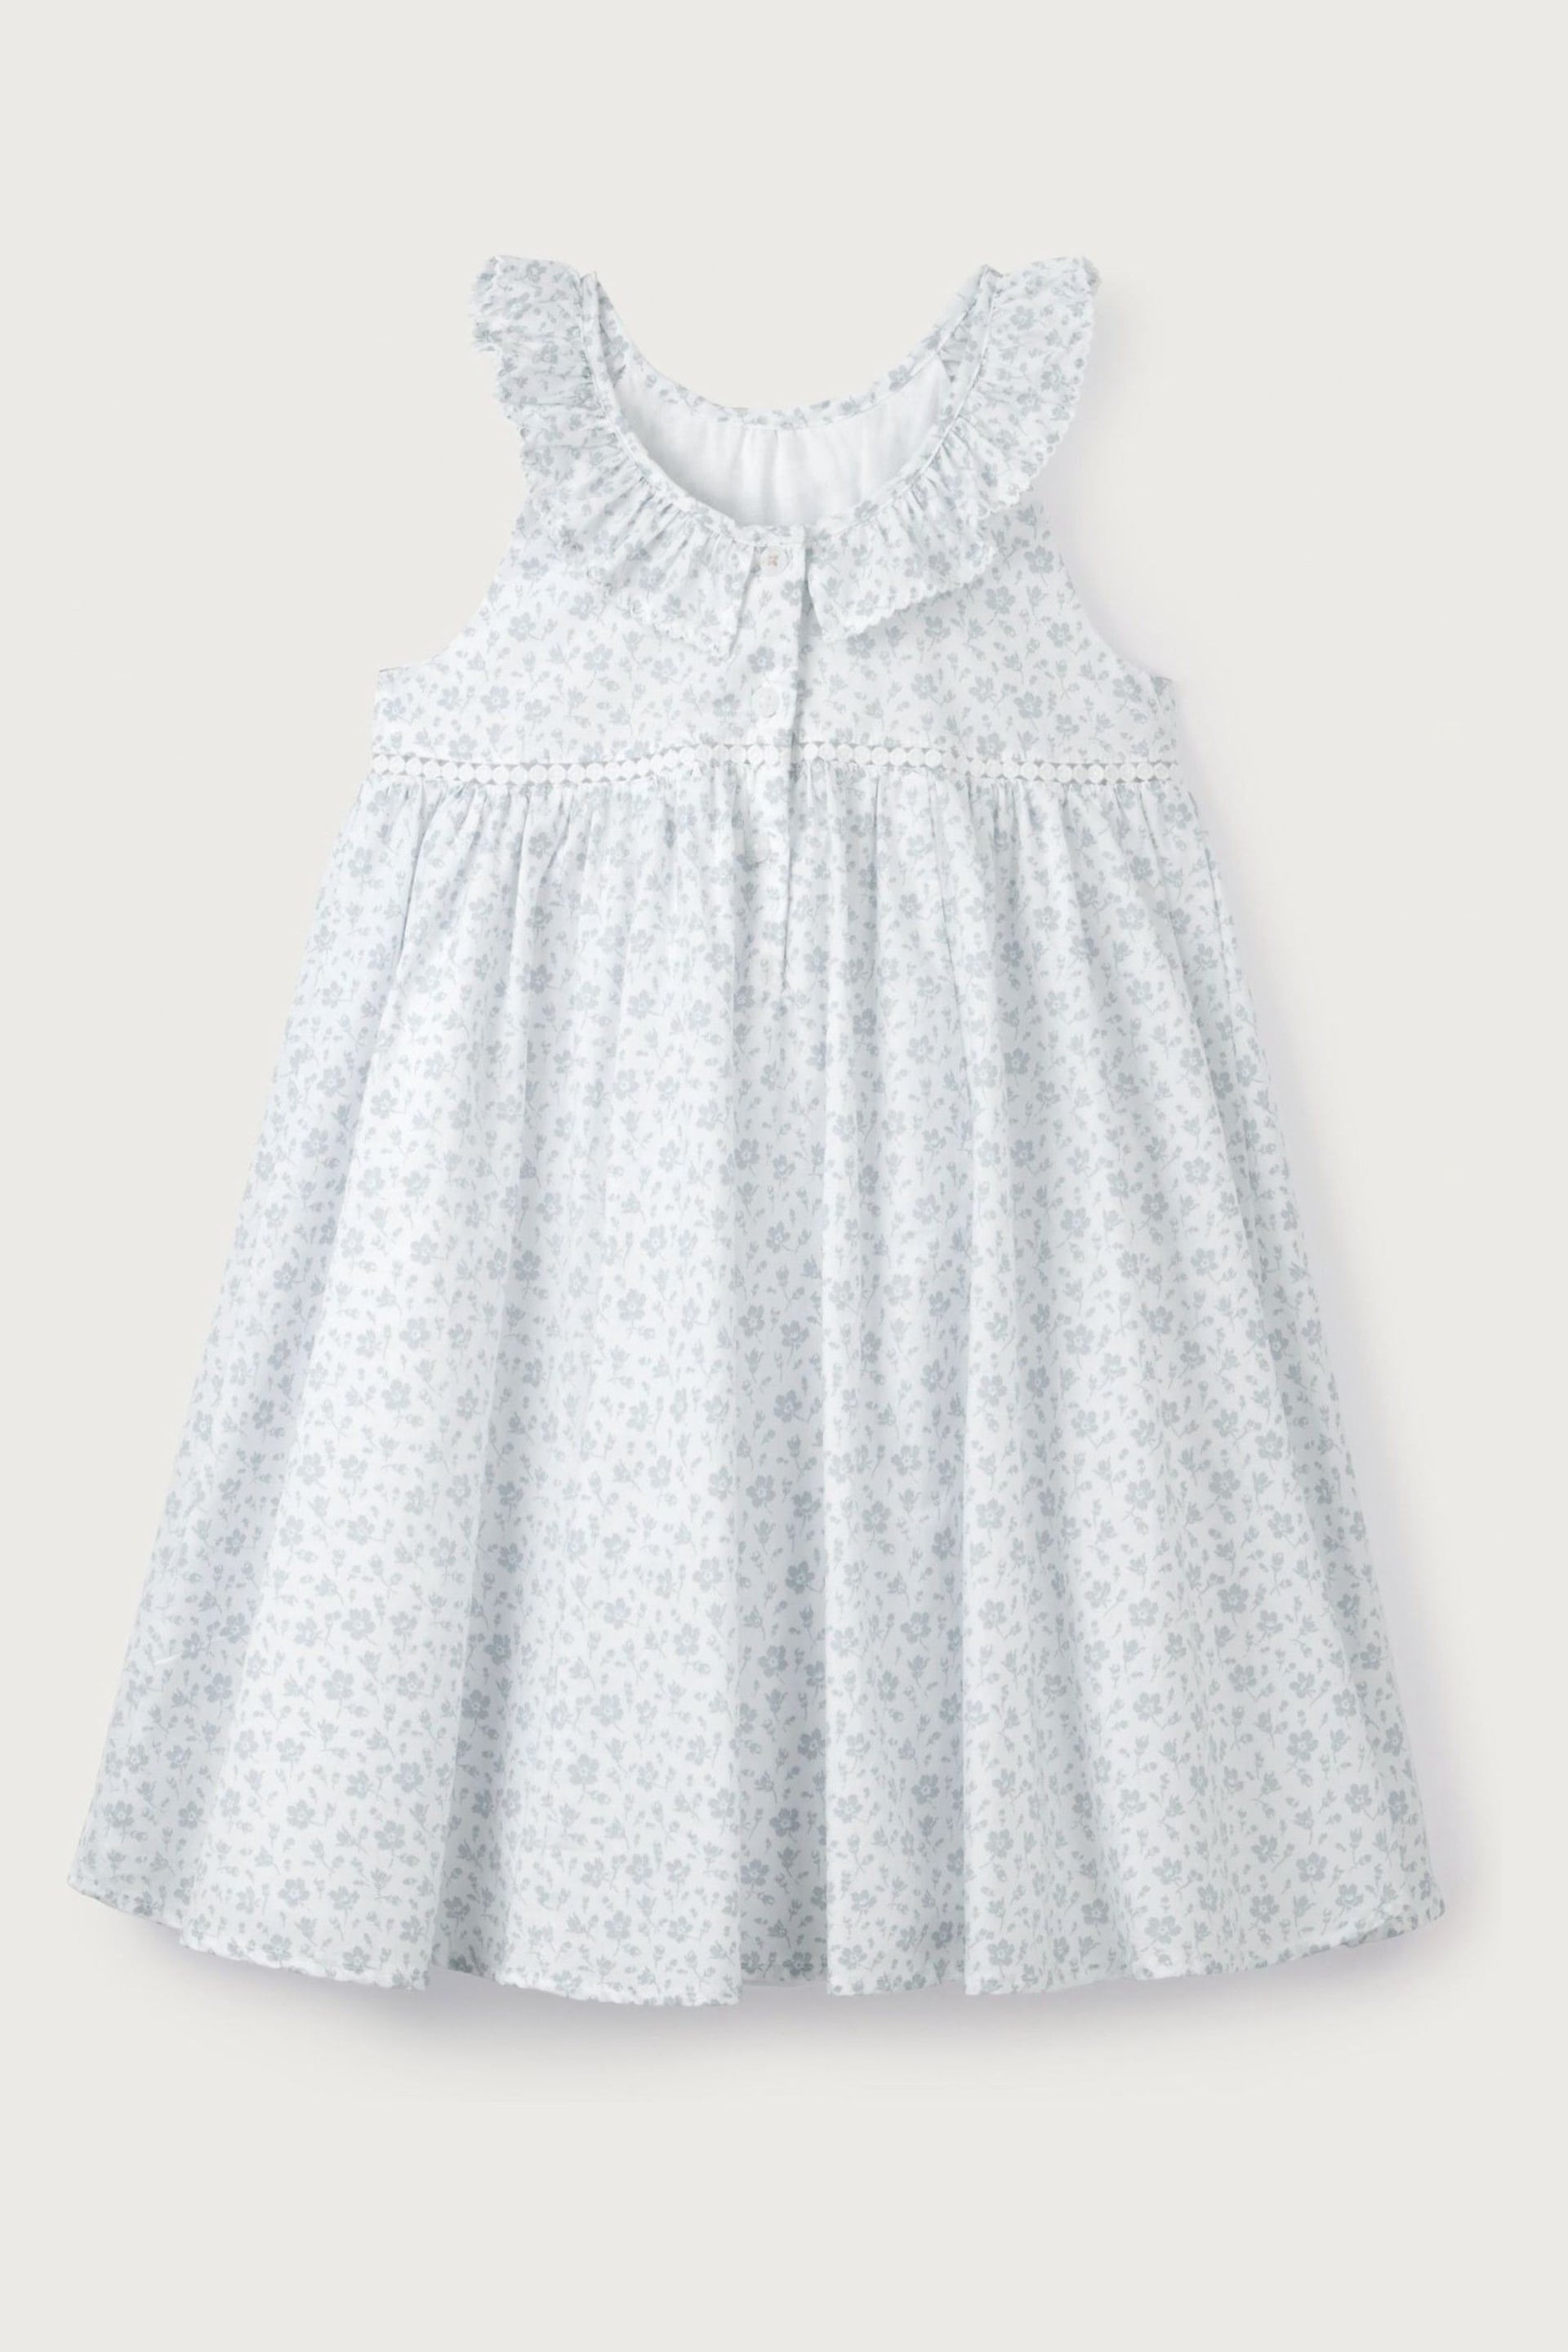 The White Company Blue Margot Floral Organic Cotton Swing Dress - Image 9 of 12